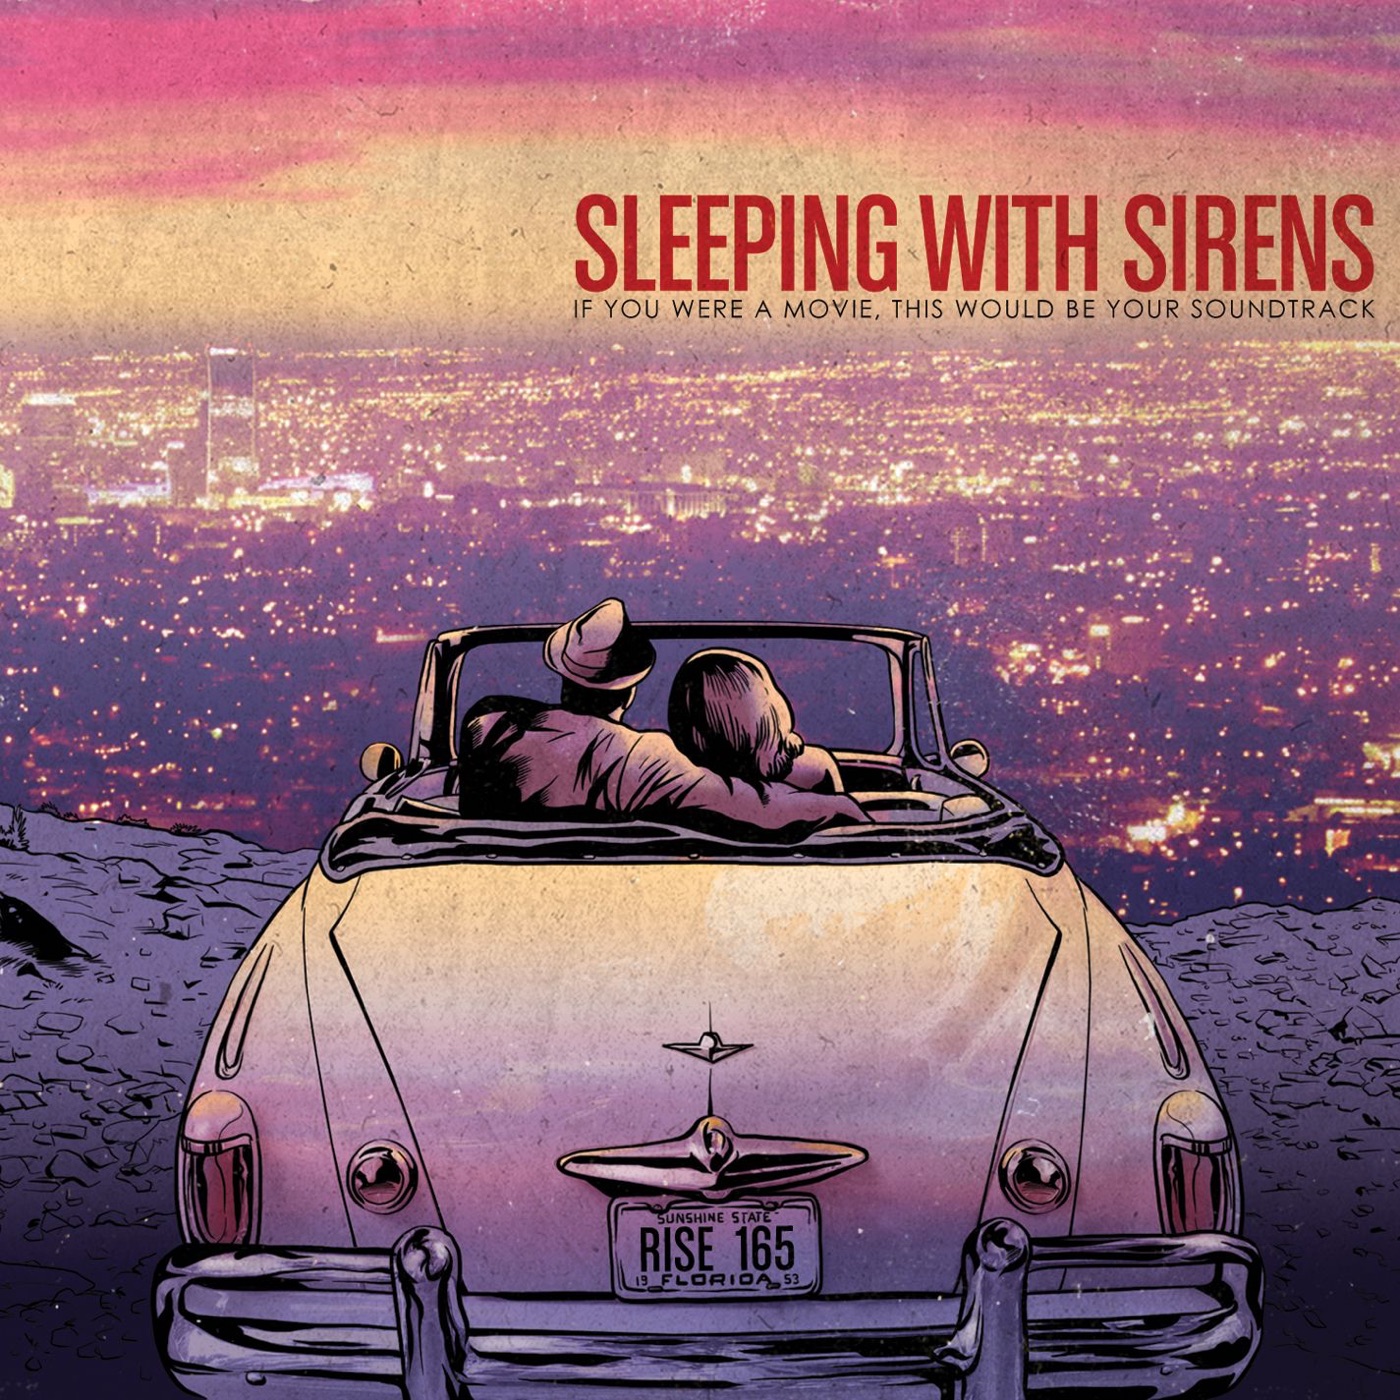 If you were a movie, this would be your soundtrack by Sleeping With Sirens